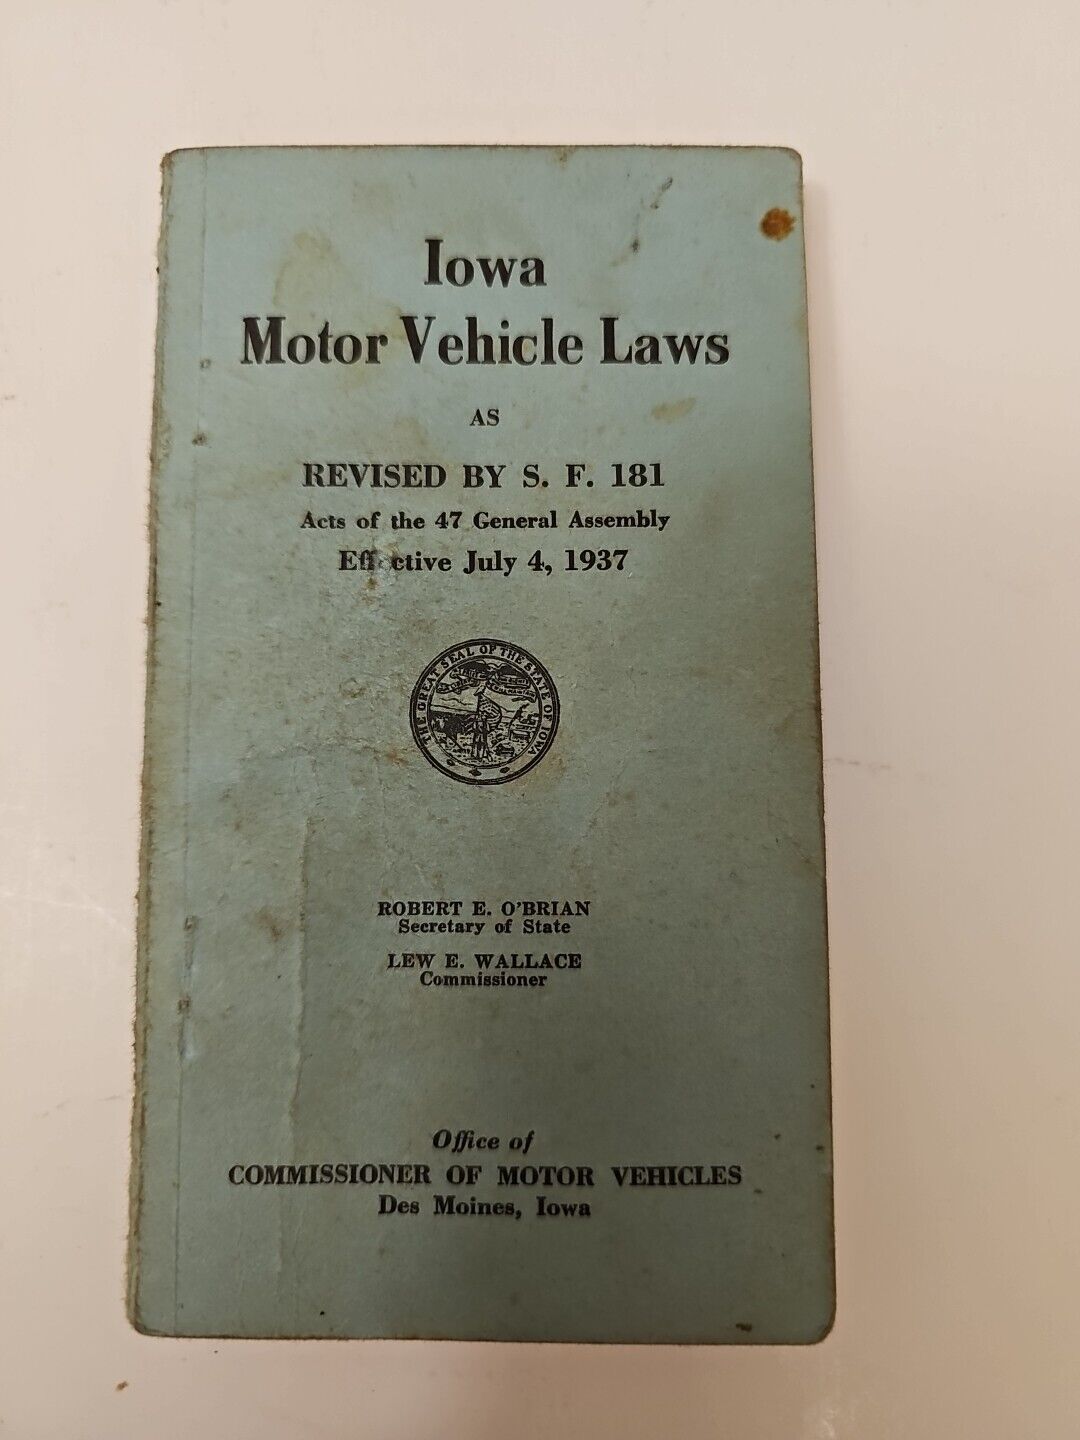 Vintage 1937 Iowa Motor Vehicle Laws Book - Historical Collectible History